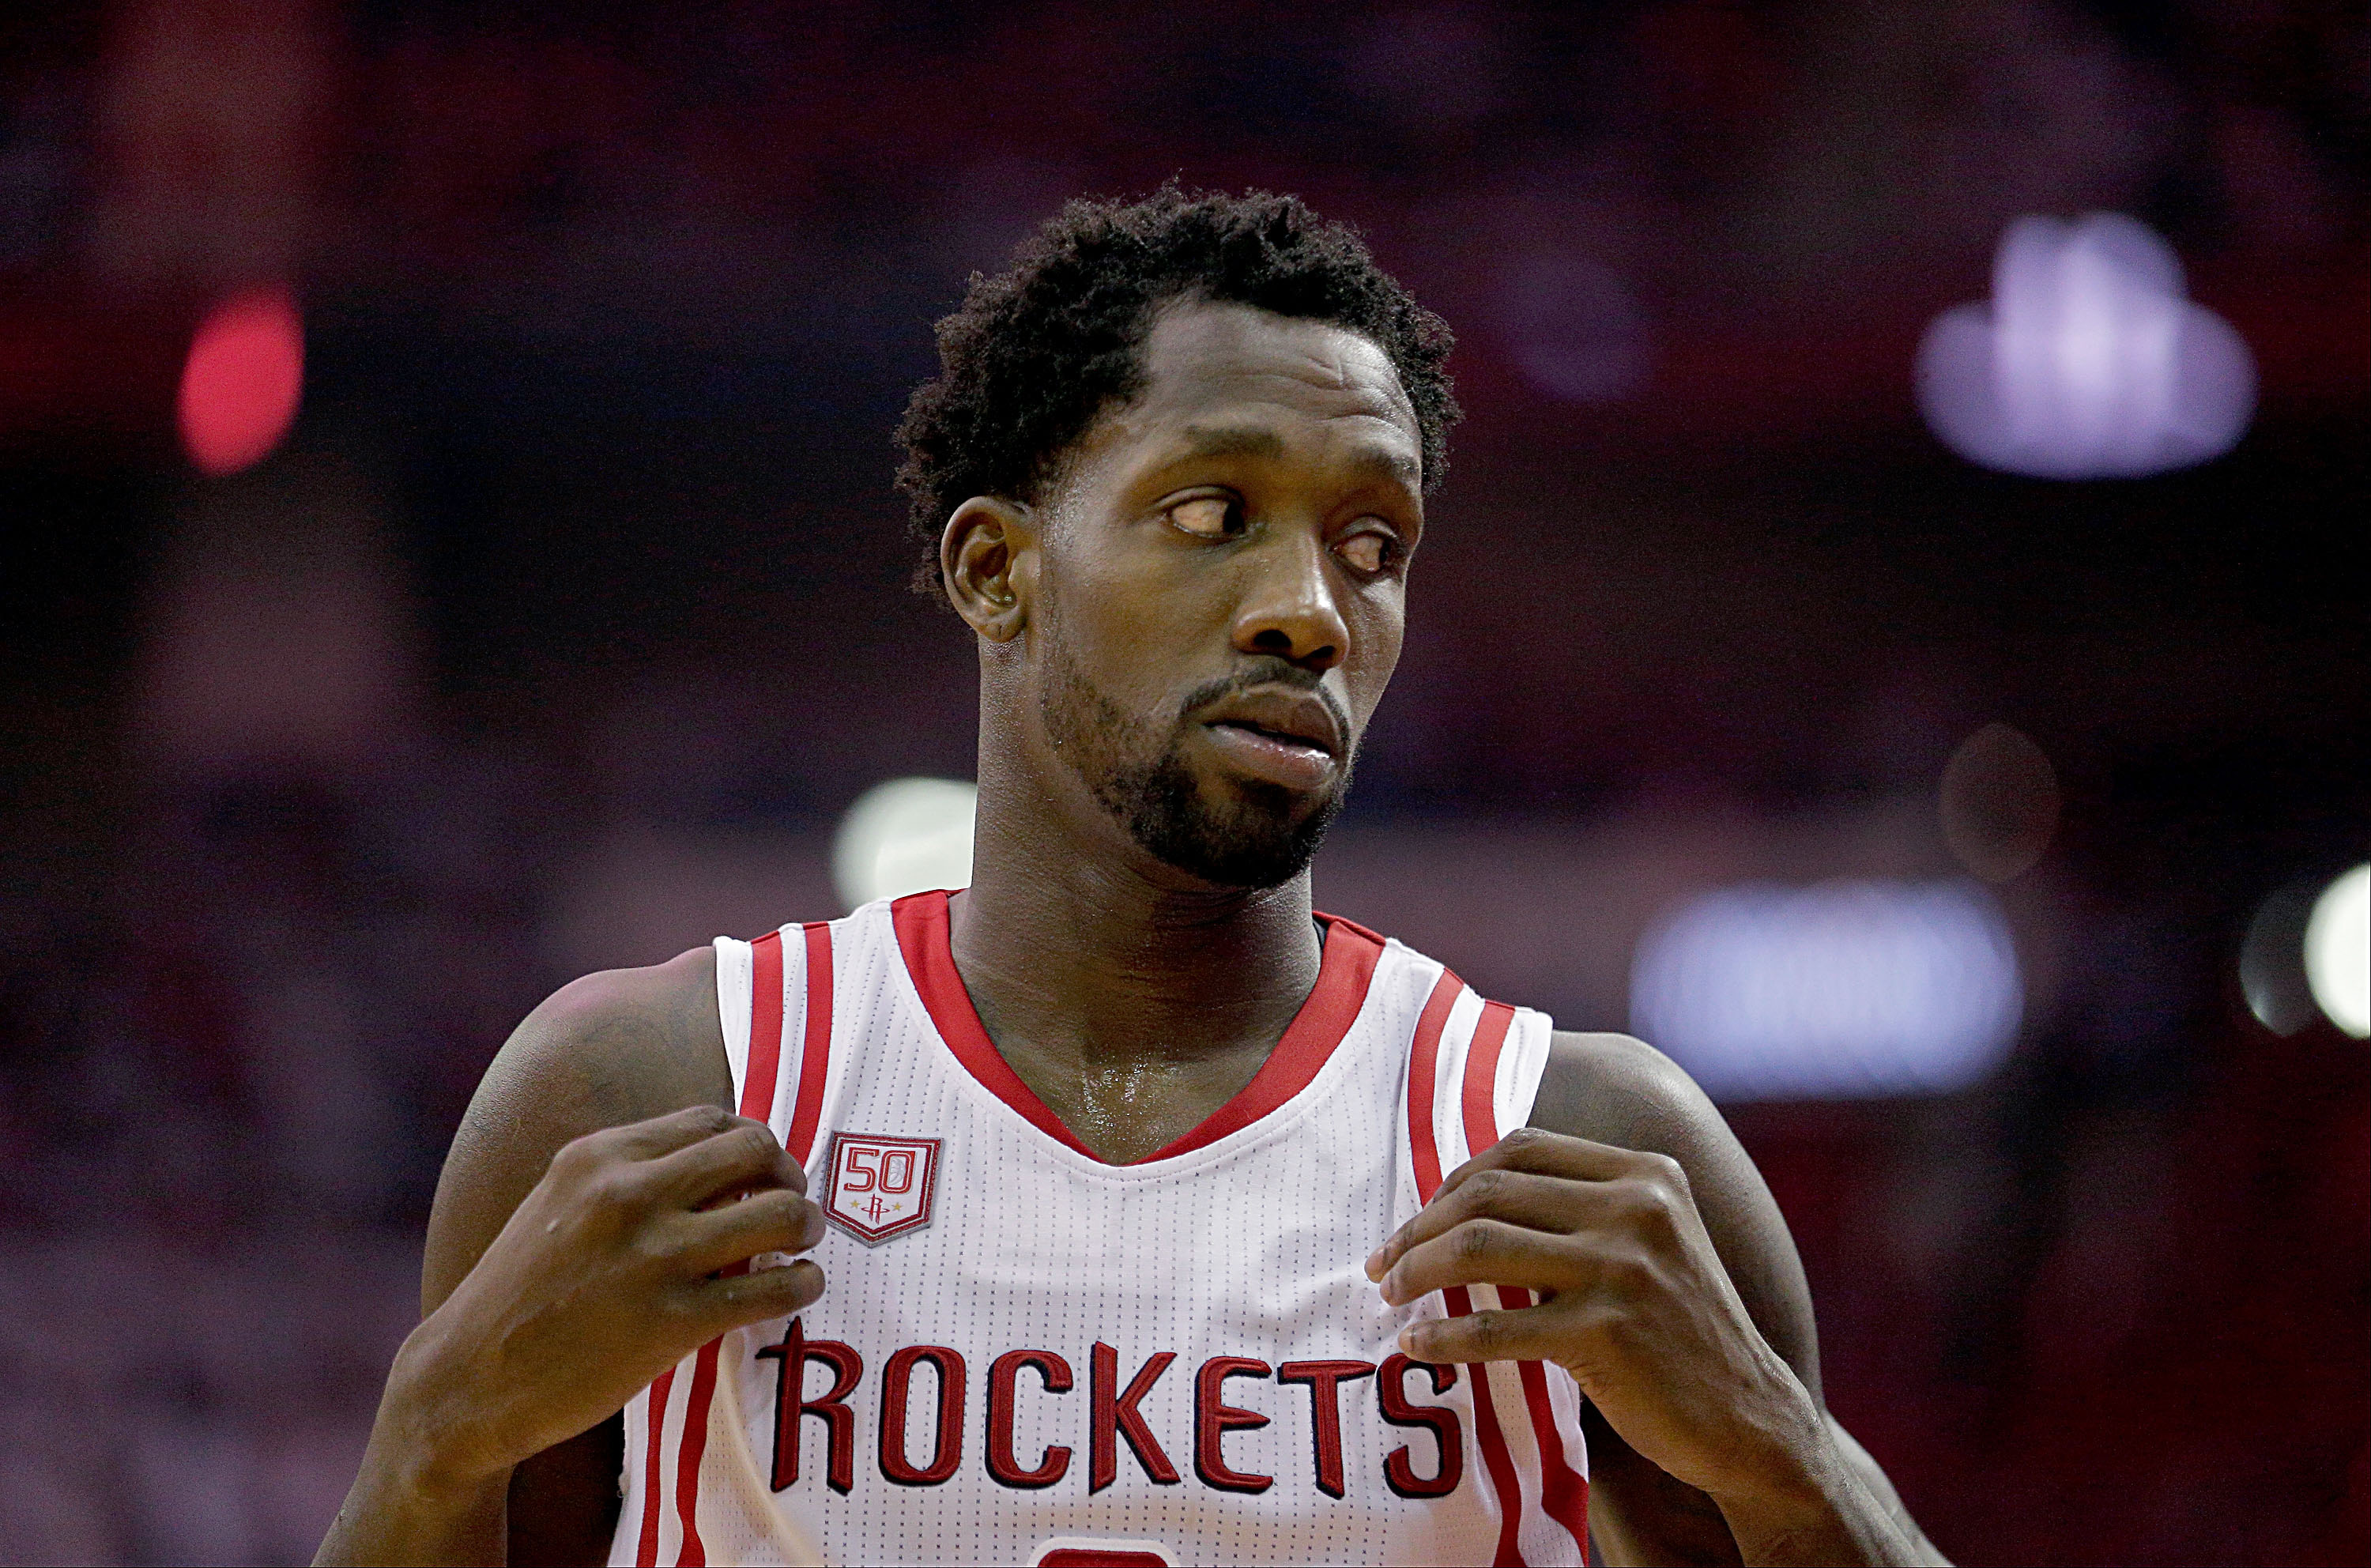 Houston Rockets: Patrick Beverley confirms he could be traded soon